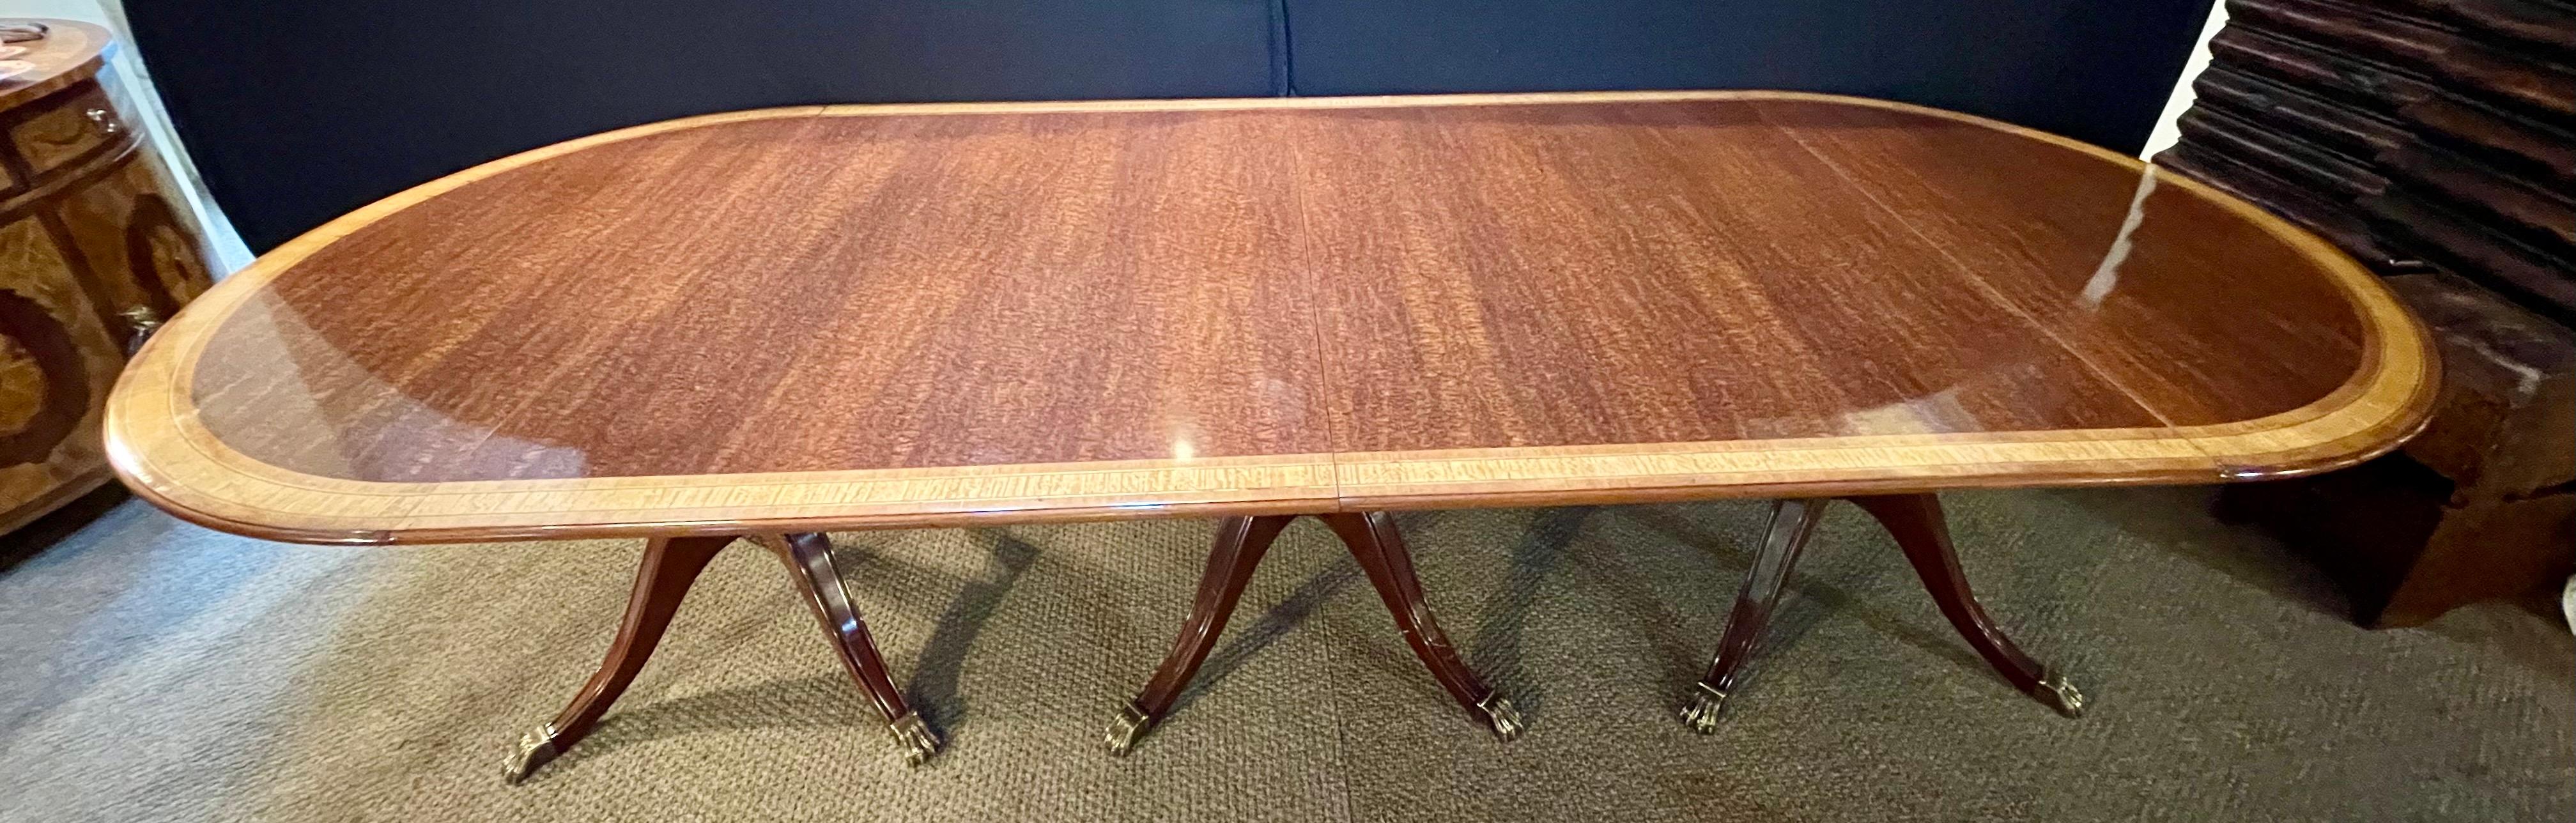 Regency Style Triple Pedestal Dining Room Table Banded and Fully Refinished 4